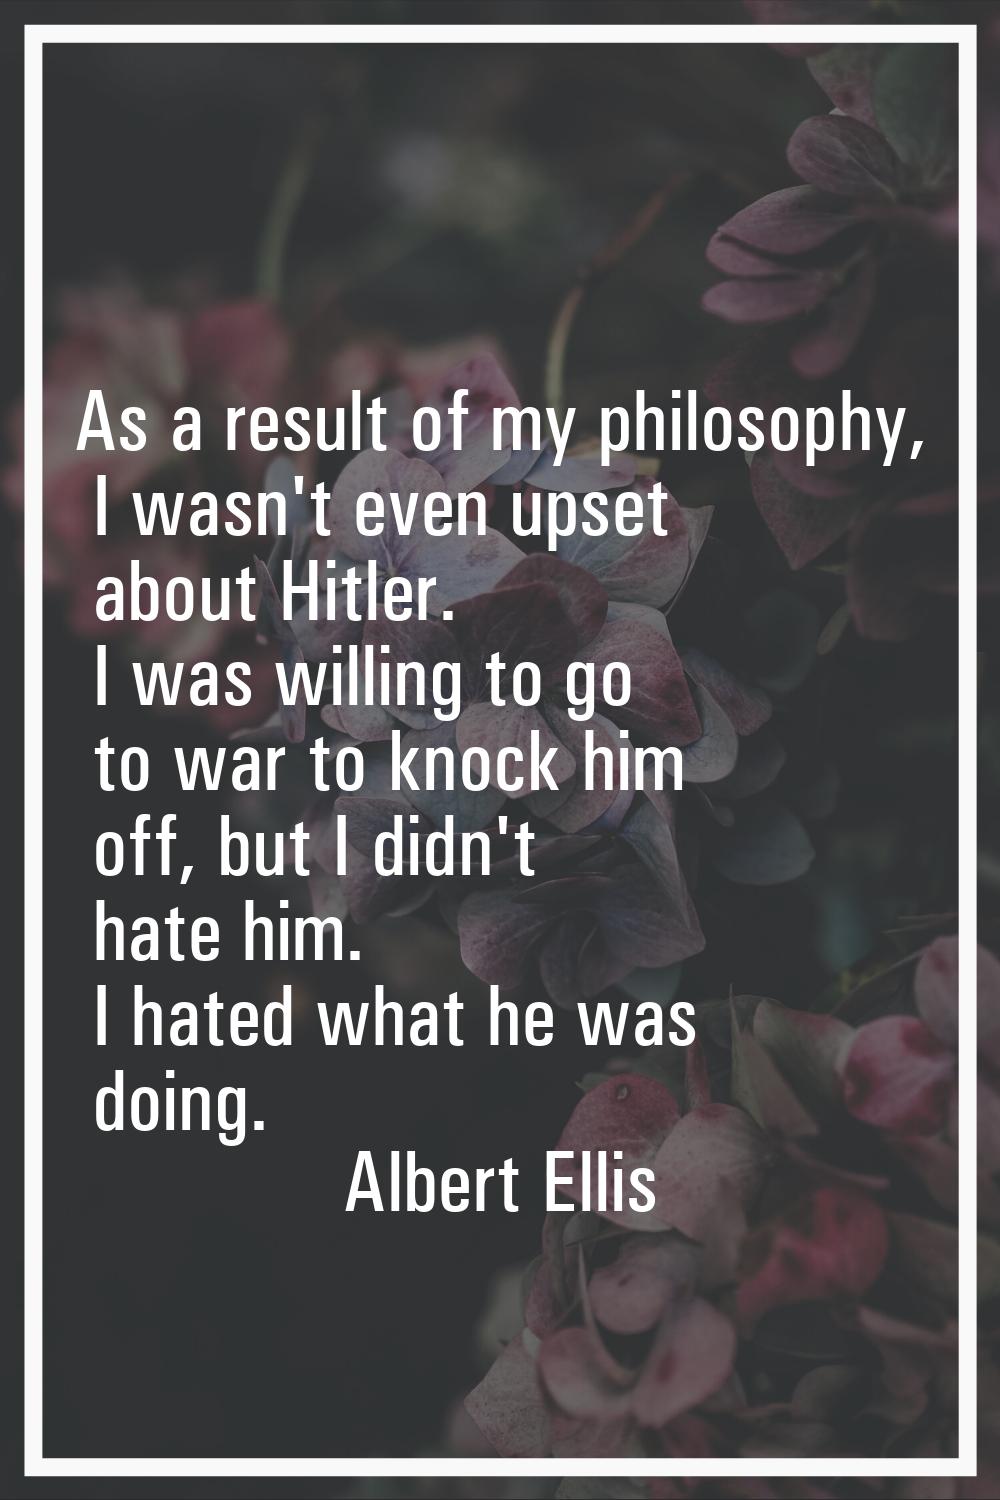 As a result of my philosophy, I wasn't even upset about Hitler. I was willing to go to war to knock